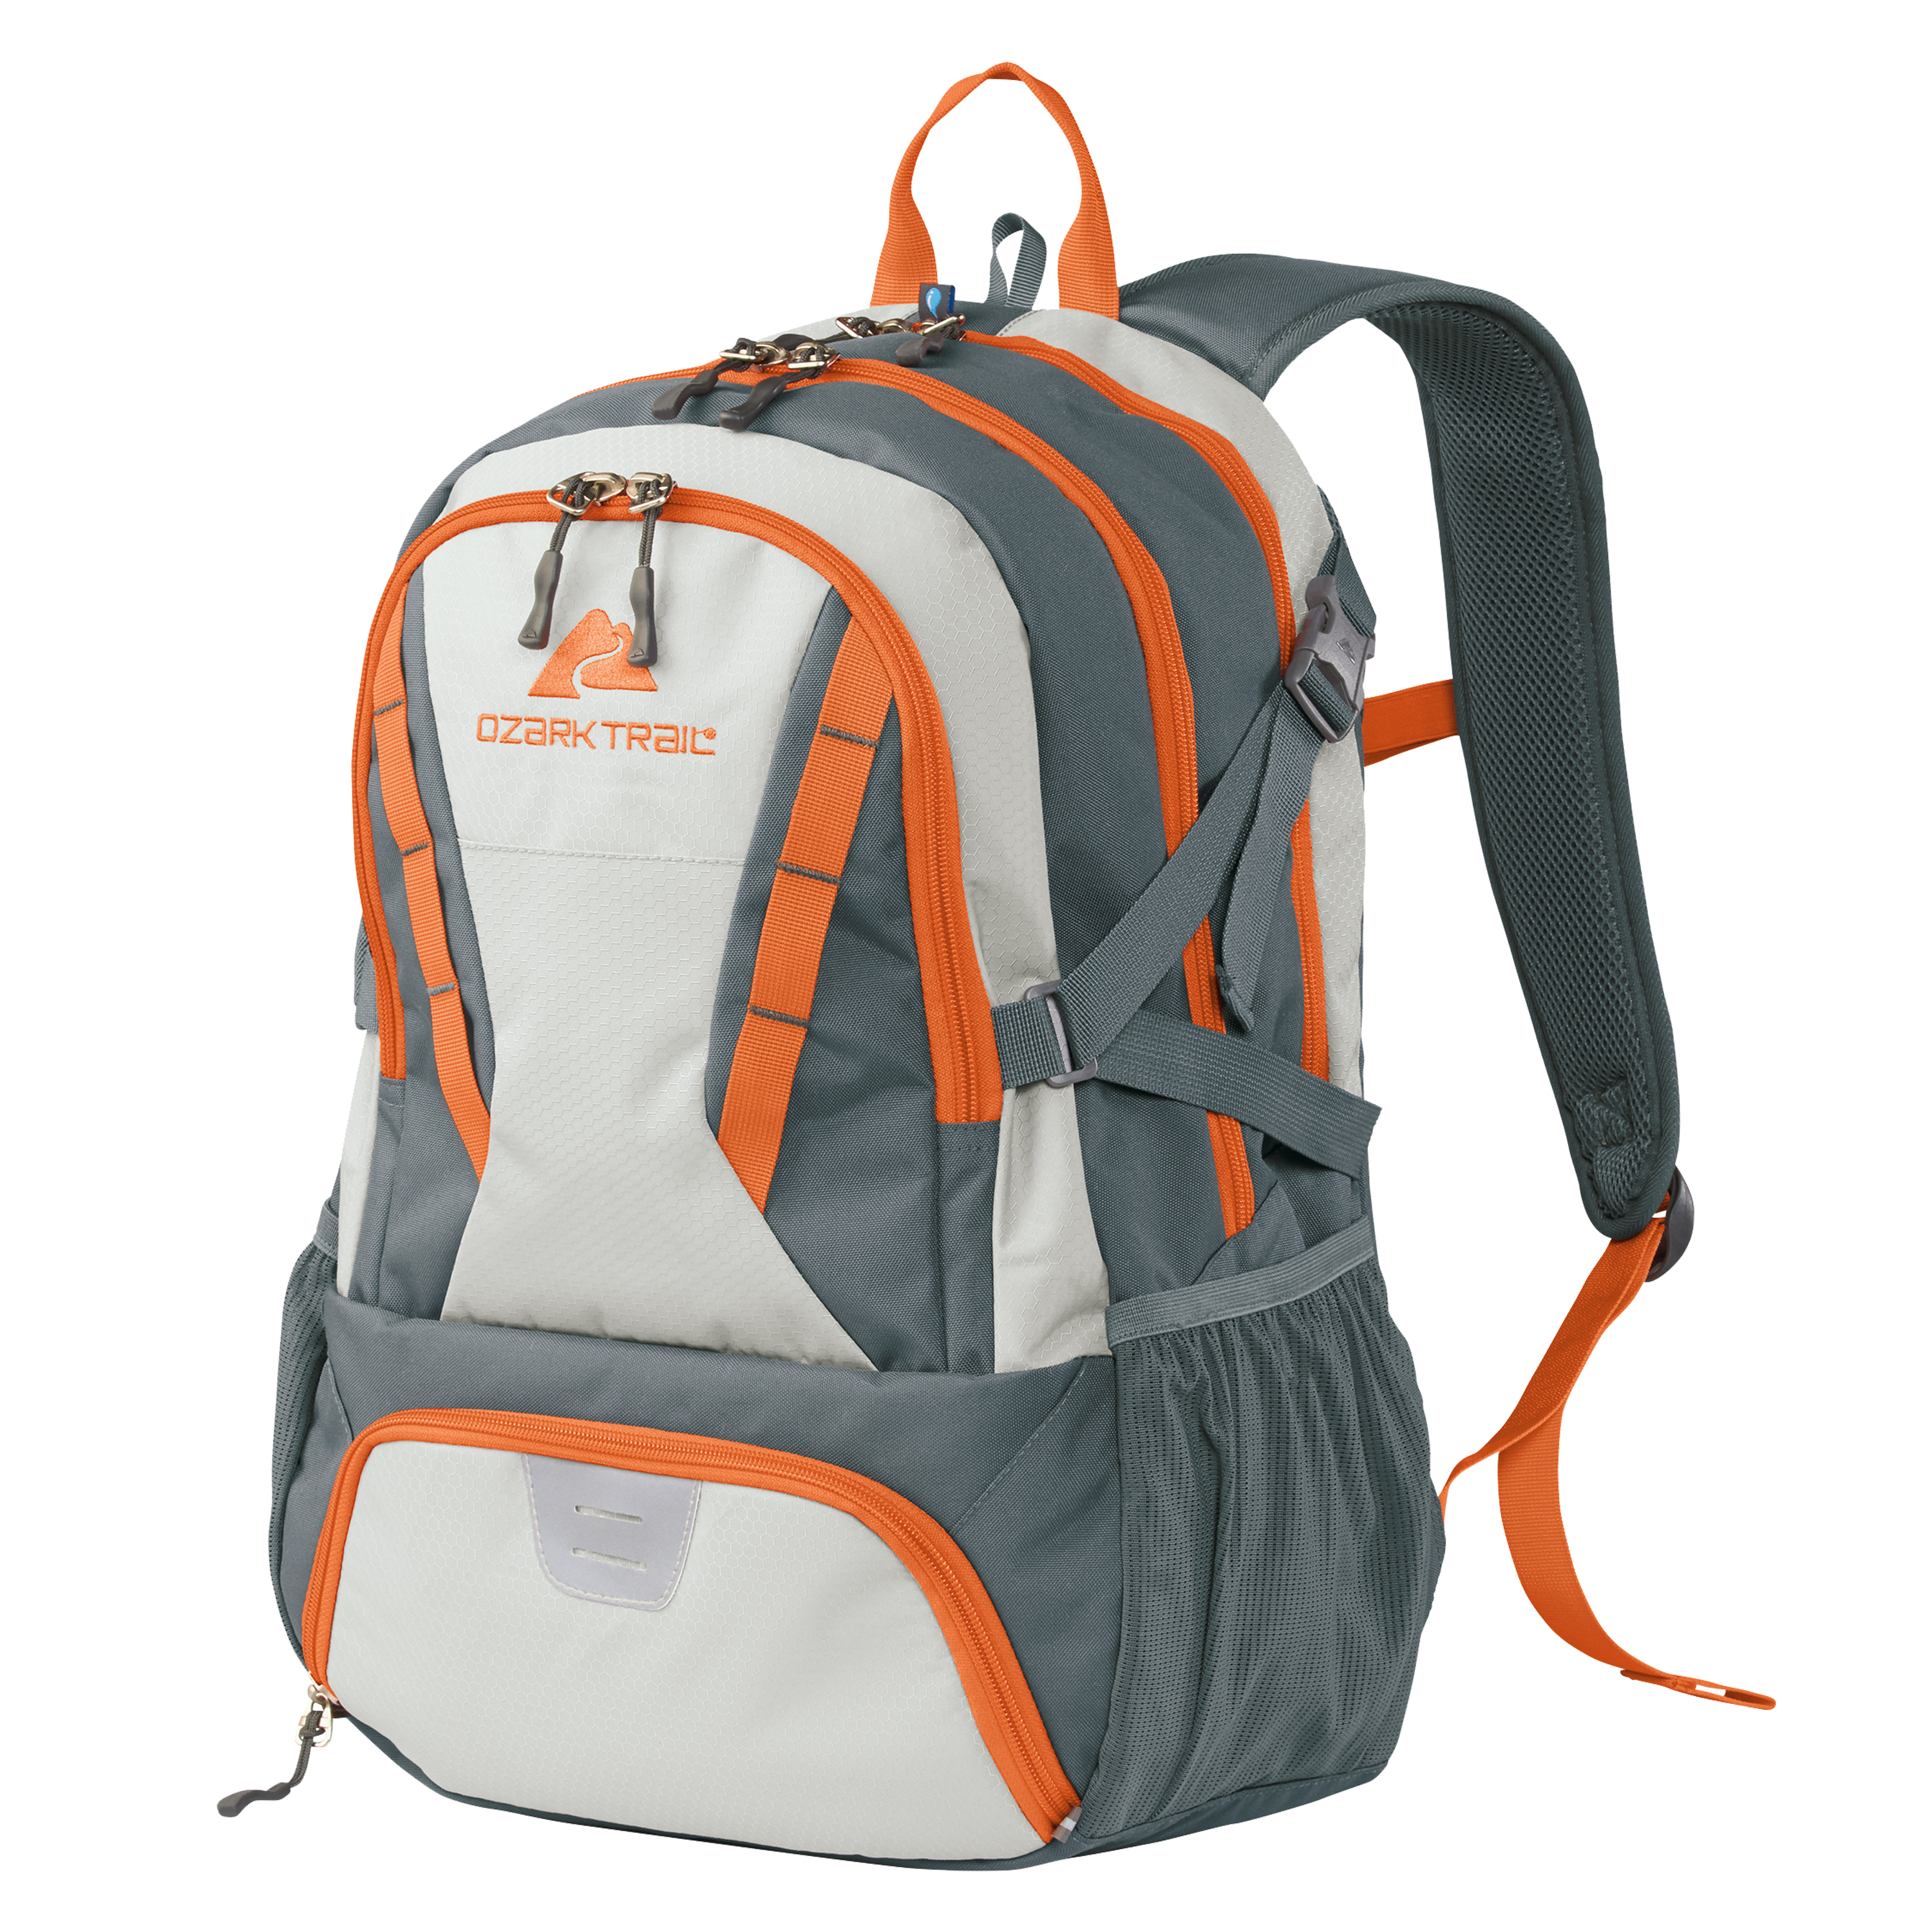 OT Backpack 35L Choteau Hydration-Compatible Camping Hiking Backpack with Insulated Cooler Compartment, Gray/Orange $14.88 - YMMV